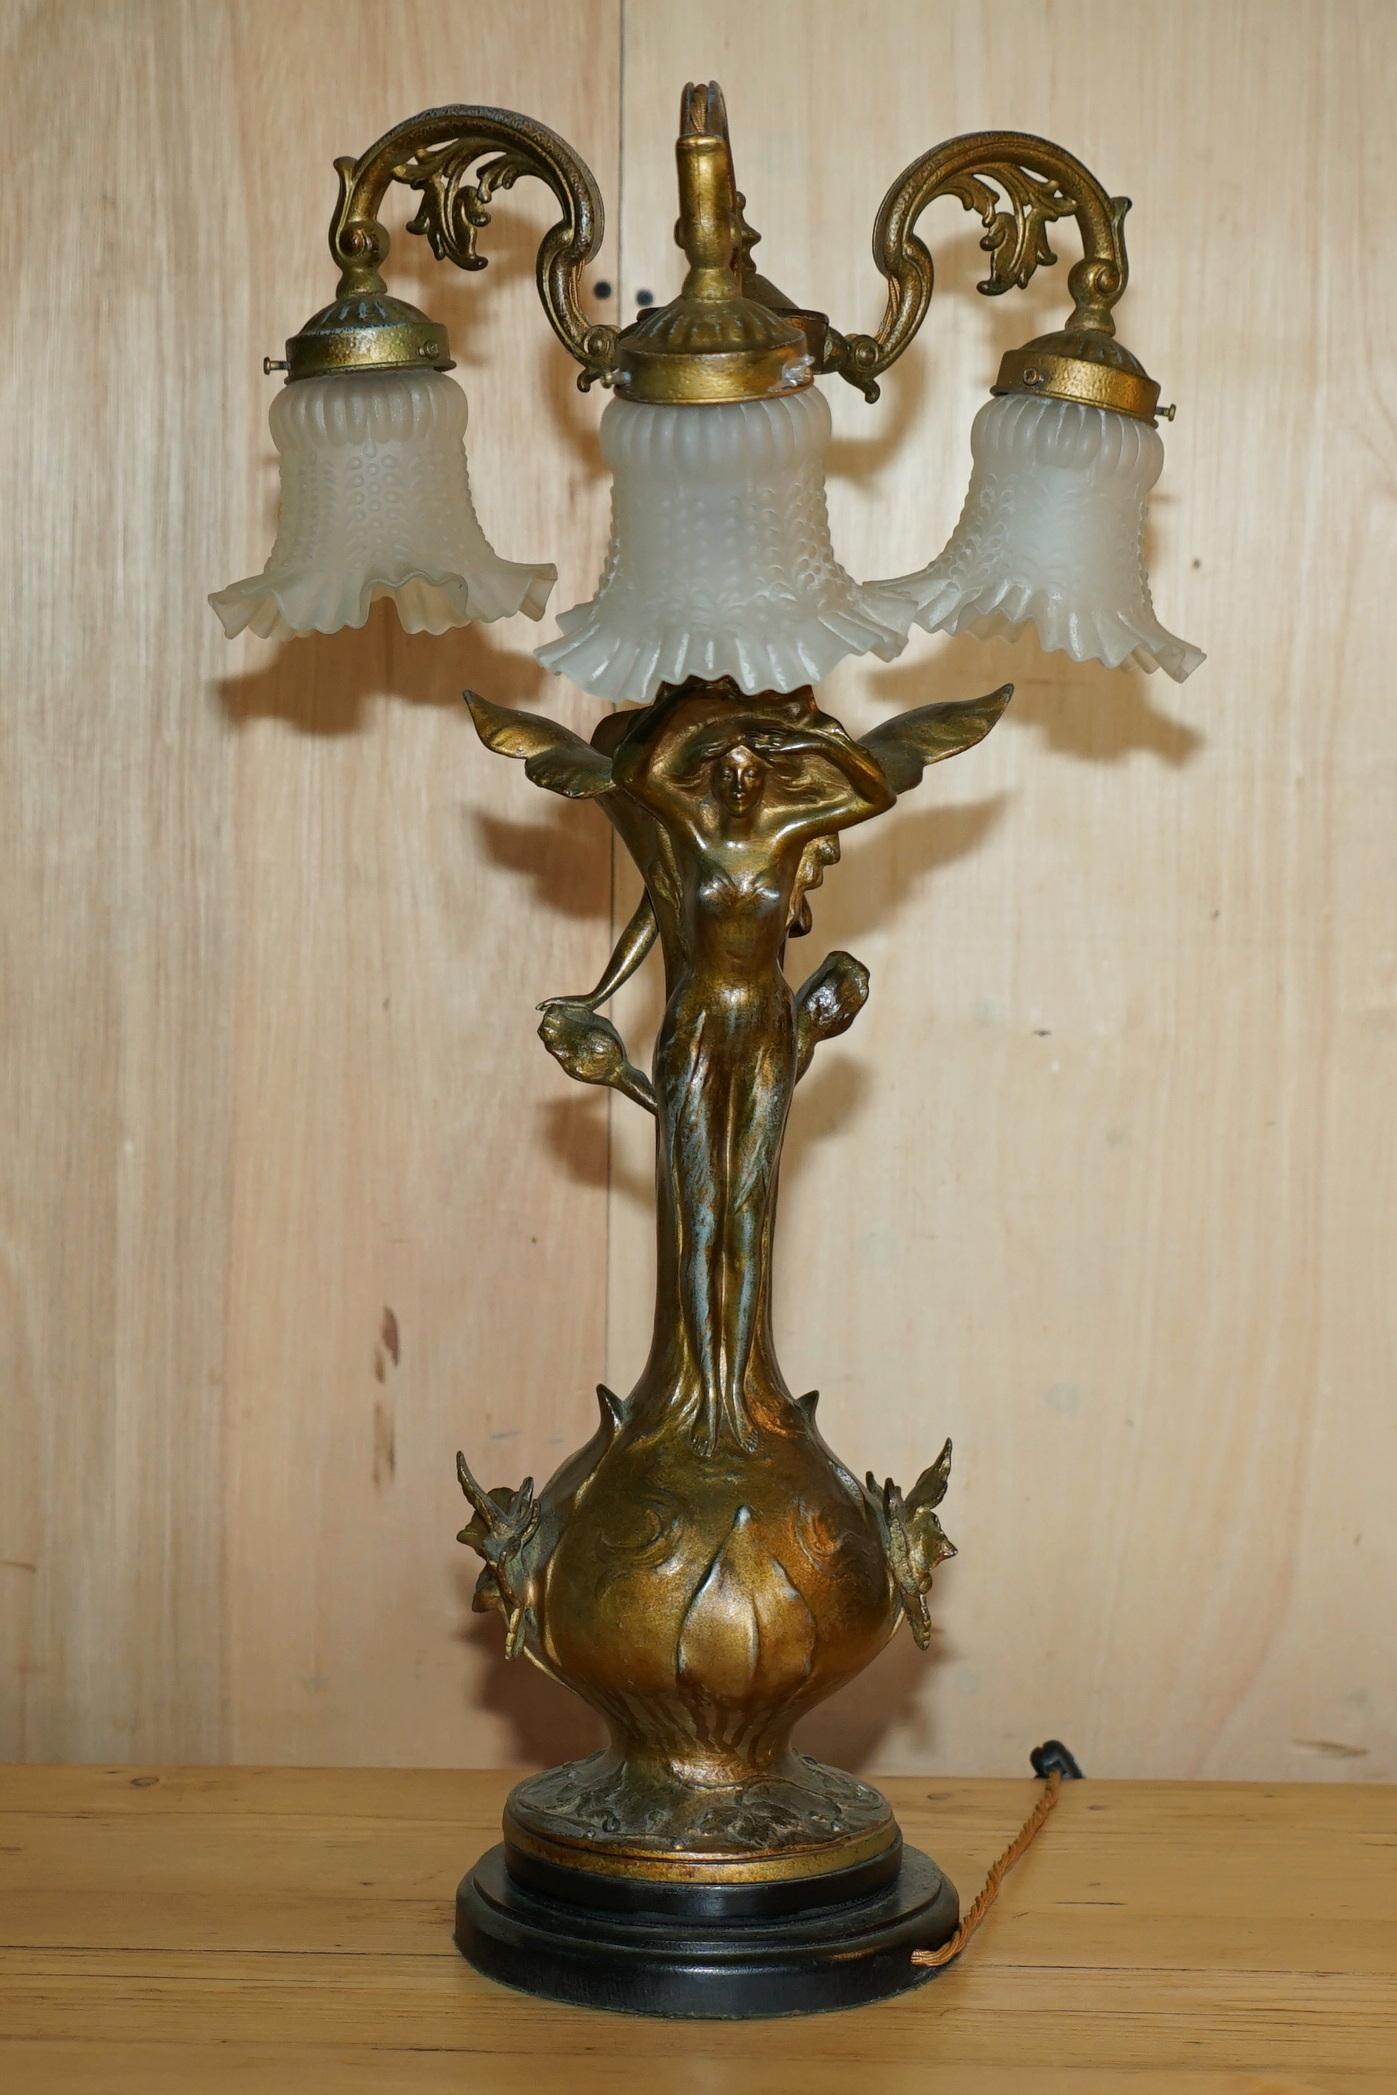 STUNNING PAIR OF LARGE ViNTAGE ART NOUVEAU BRONZED THREE BRANCH TABLE LAMPS For Sale 6